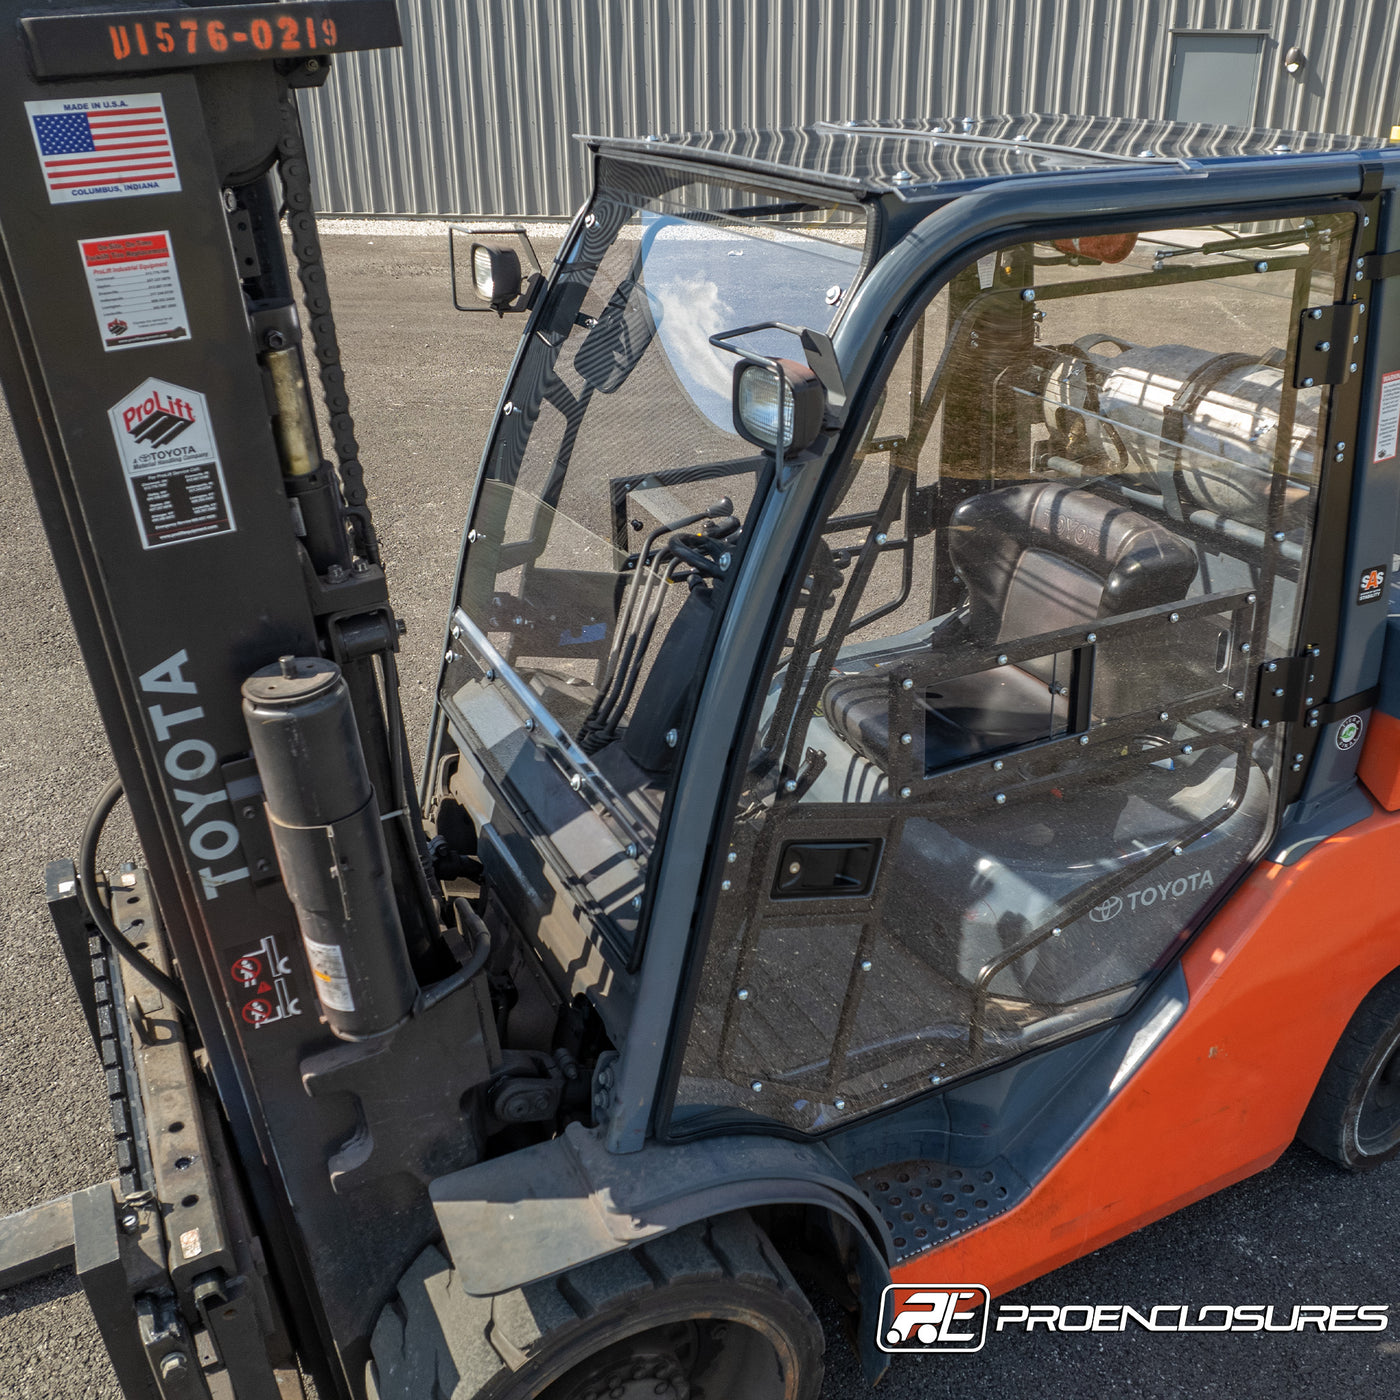 toyota forklift with cab enclosure outside